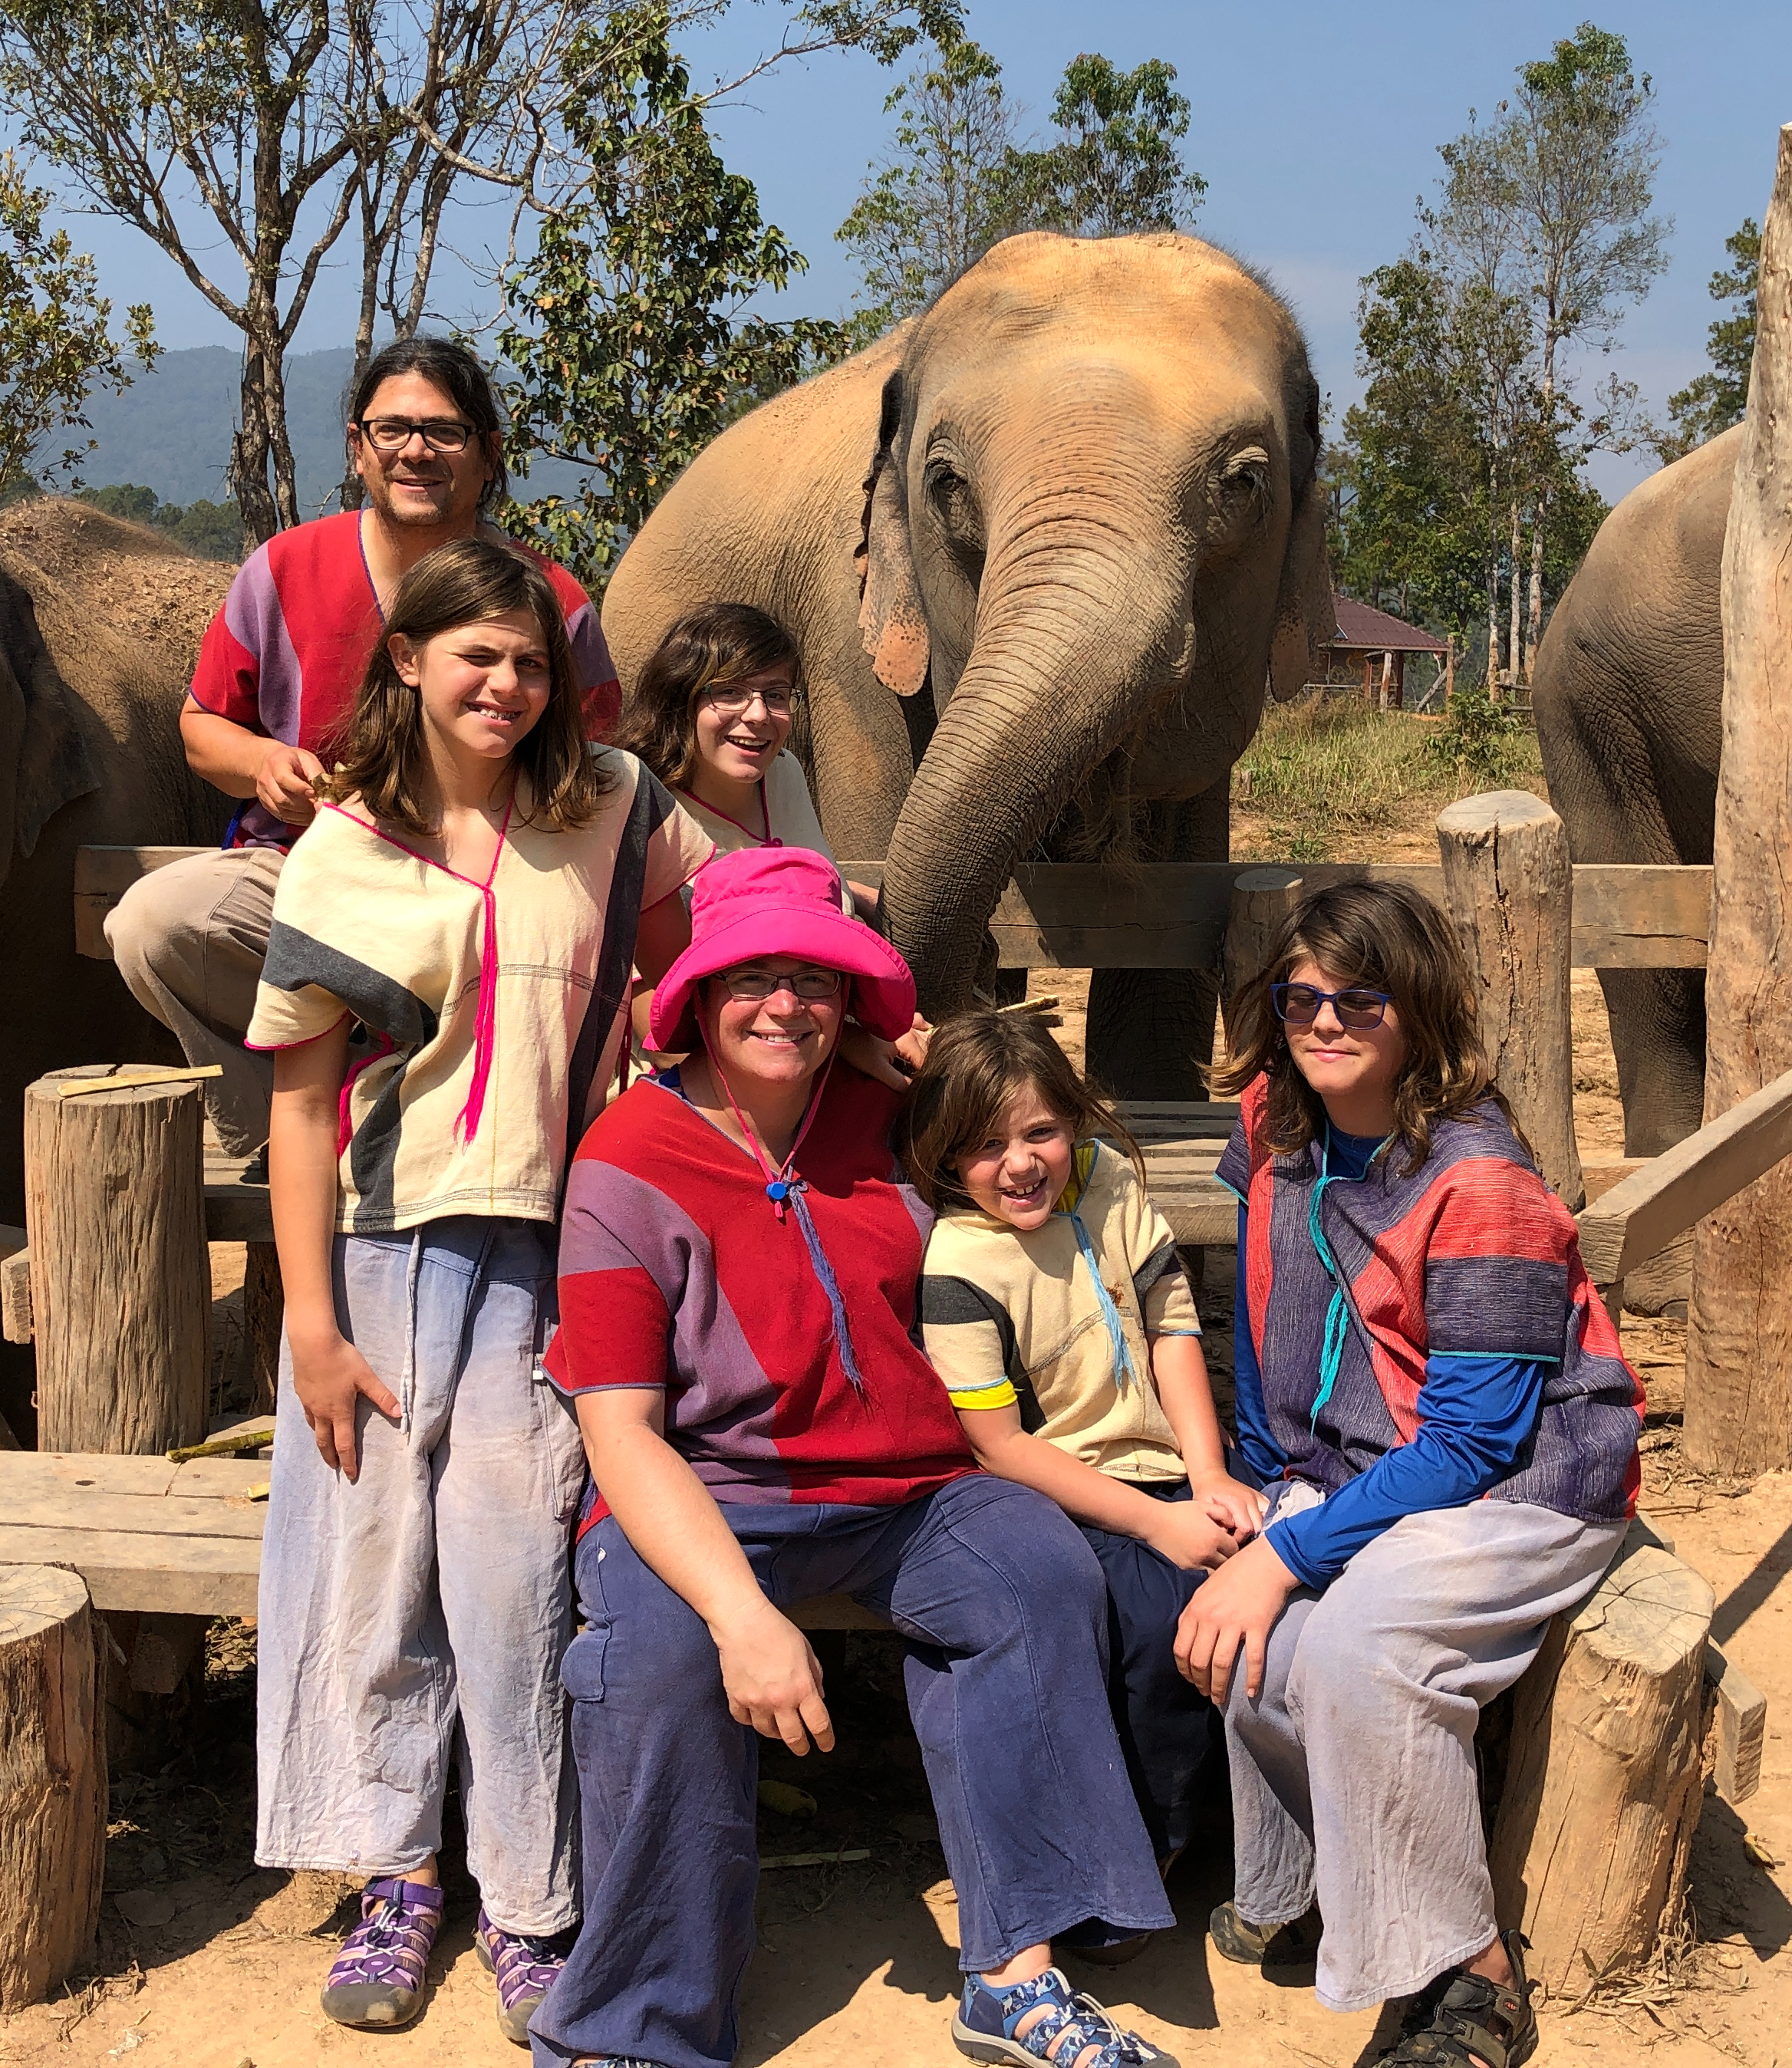 The six of us sitting in front of a fence with an elephant just behind it. His trunk is over the fence and one of us might be patting it.